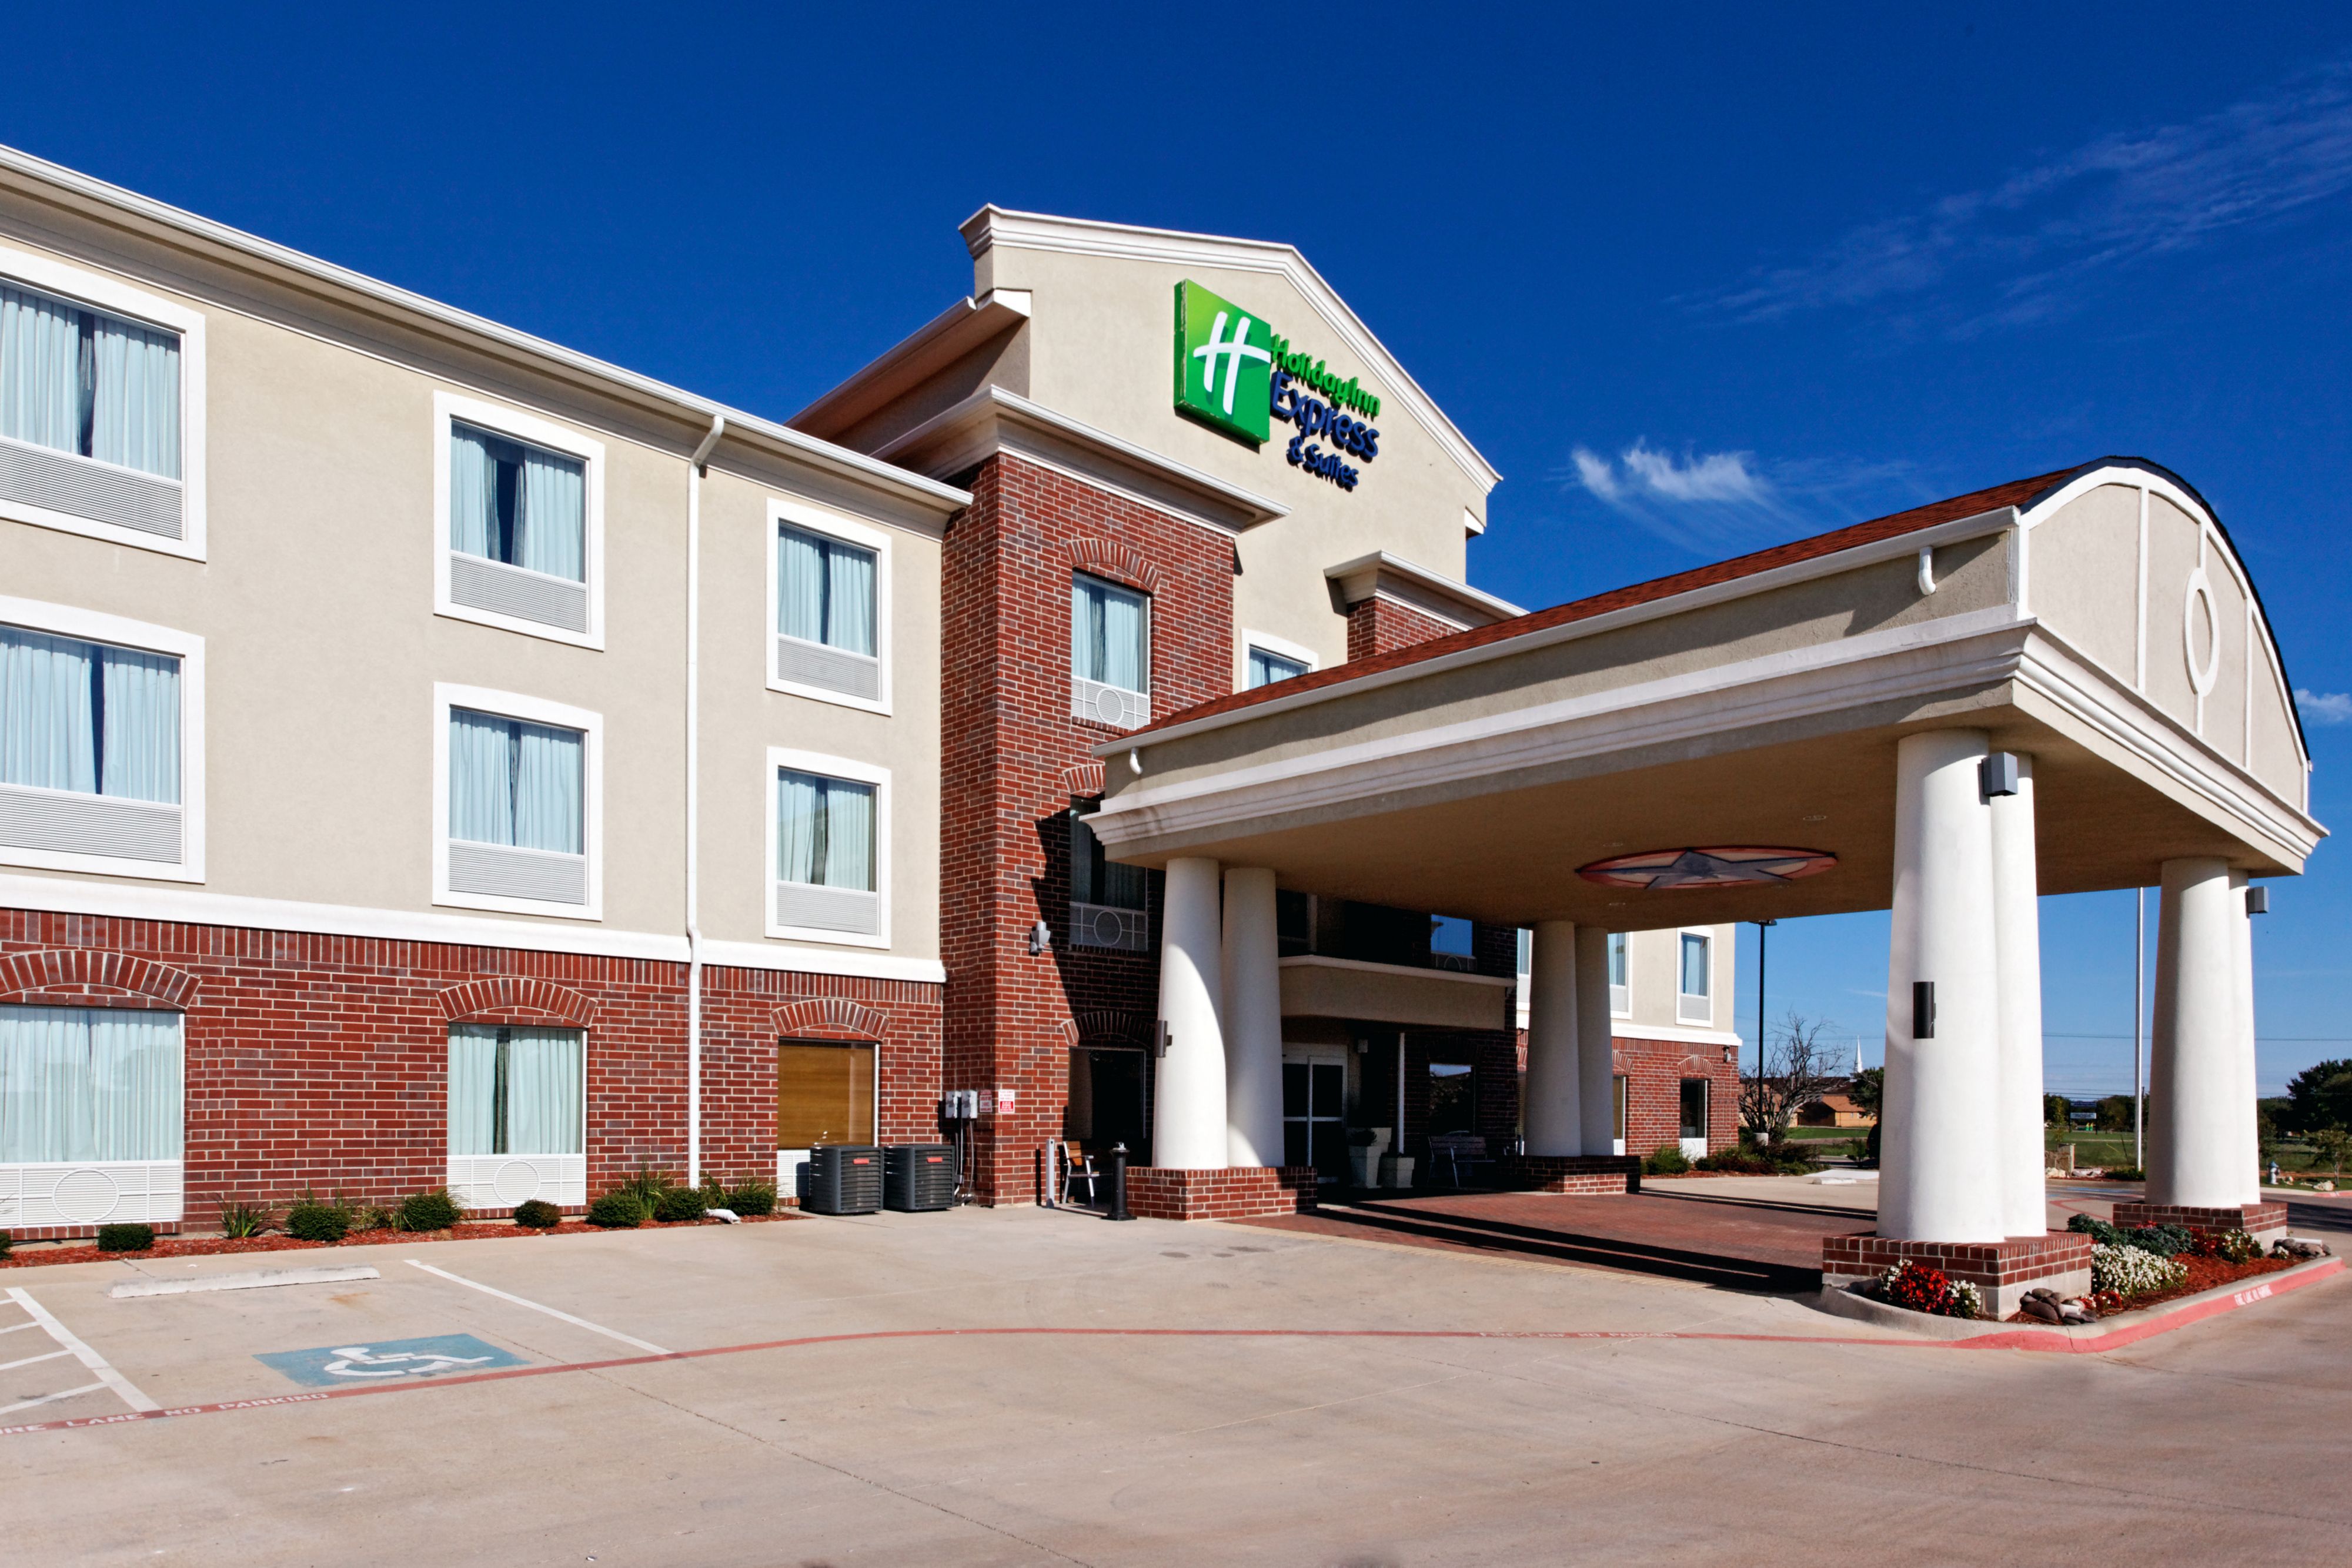 holiday-inn-express-and-suites-cleburne-4247259443-original.jpg